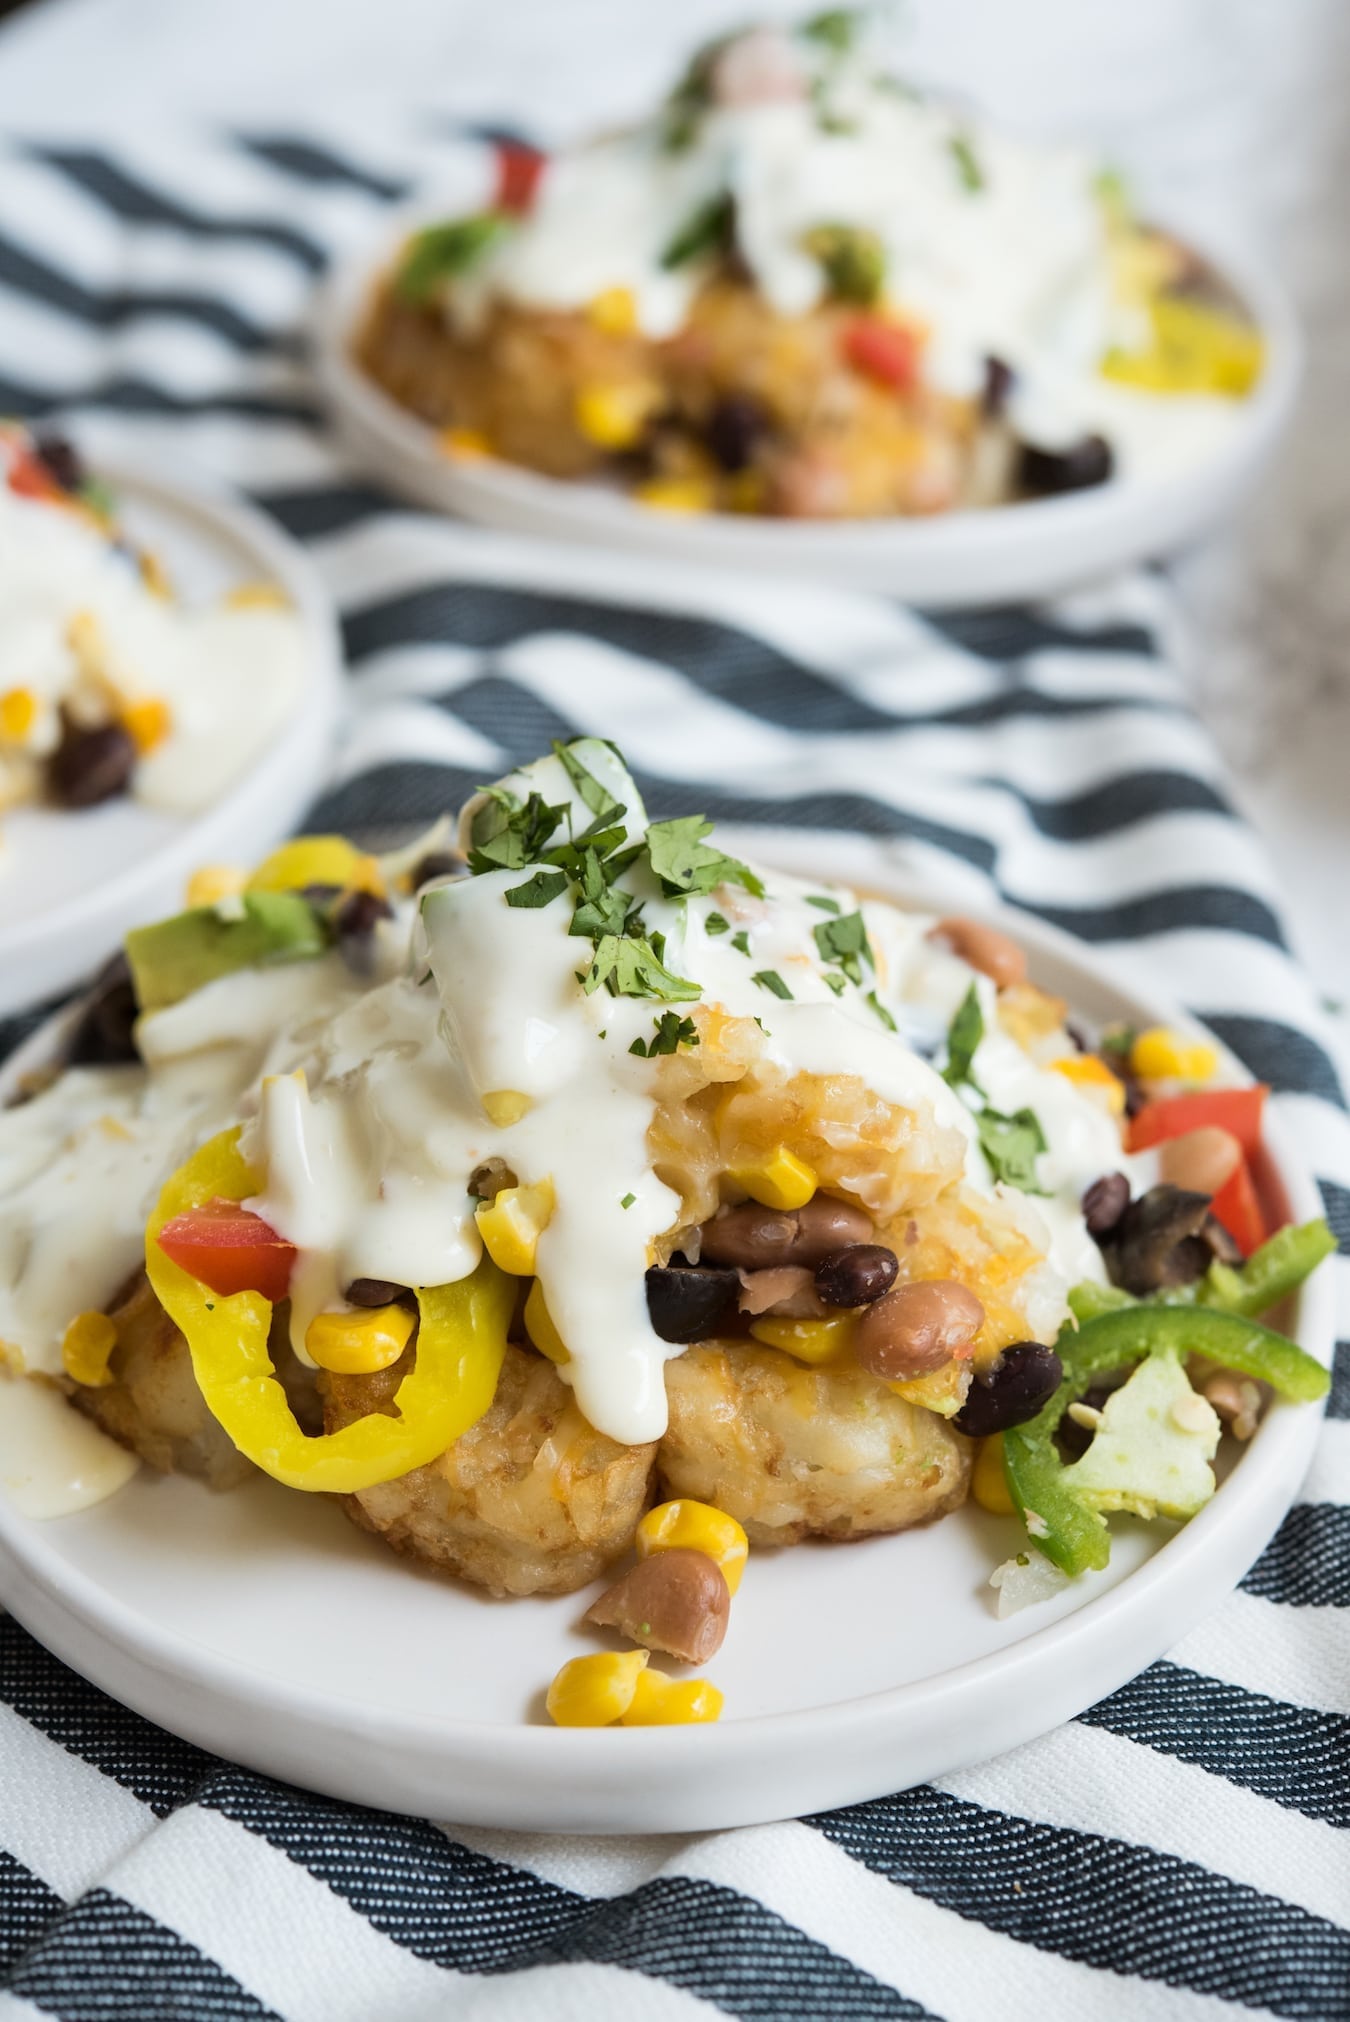 Easy game day recipes - loaded tater tot nachos from @cydconverse!